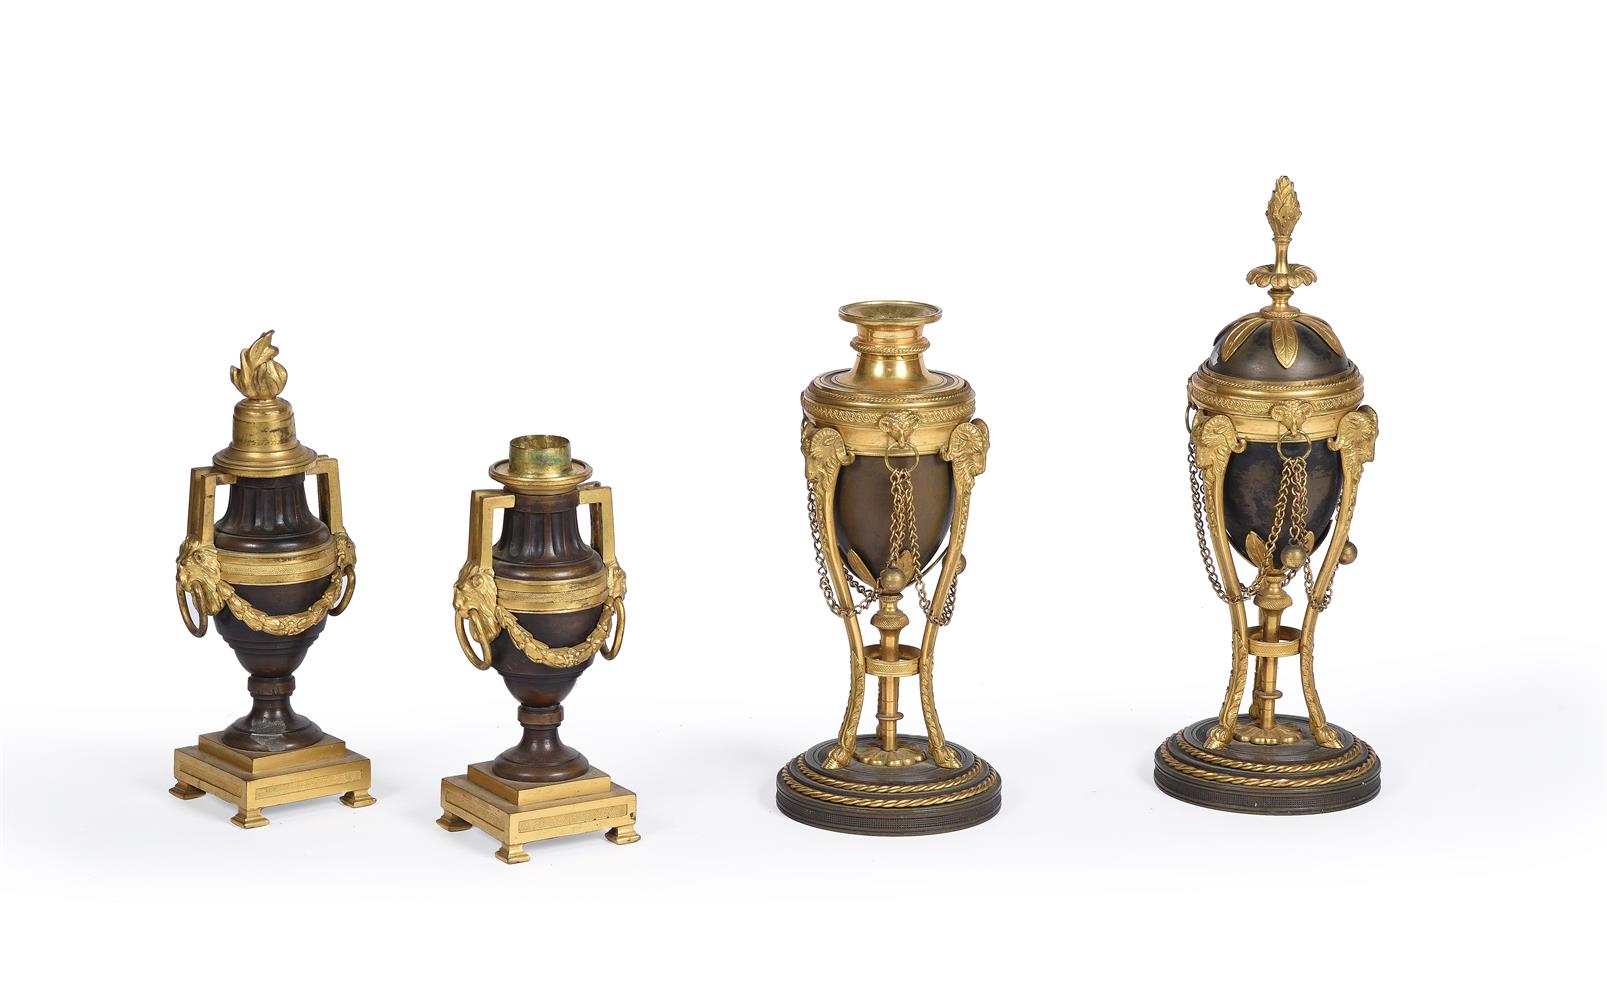 TWO PAIRS OF BRONZE AND ORMOLU CASSOLETTES, FIRST PAIR POSSIBLY ENGLISH, EARLY 19TH CENTURY